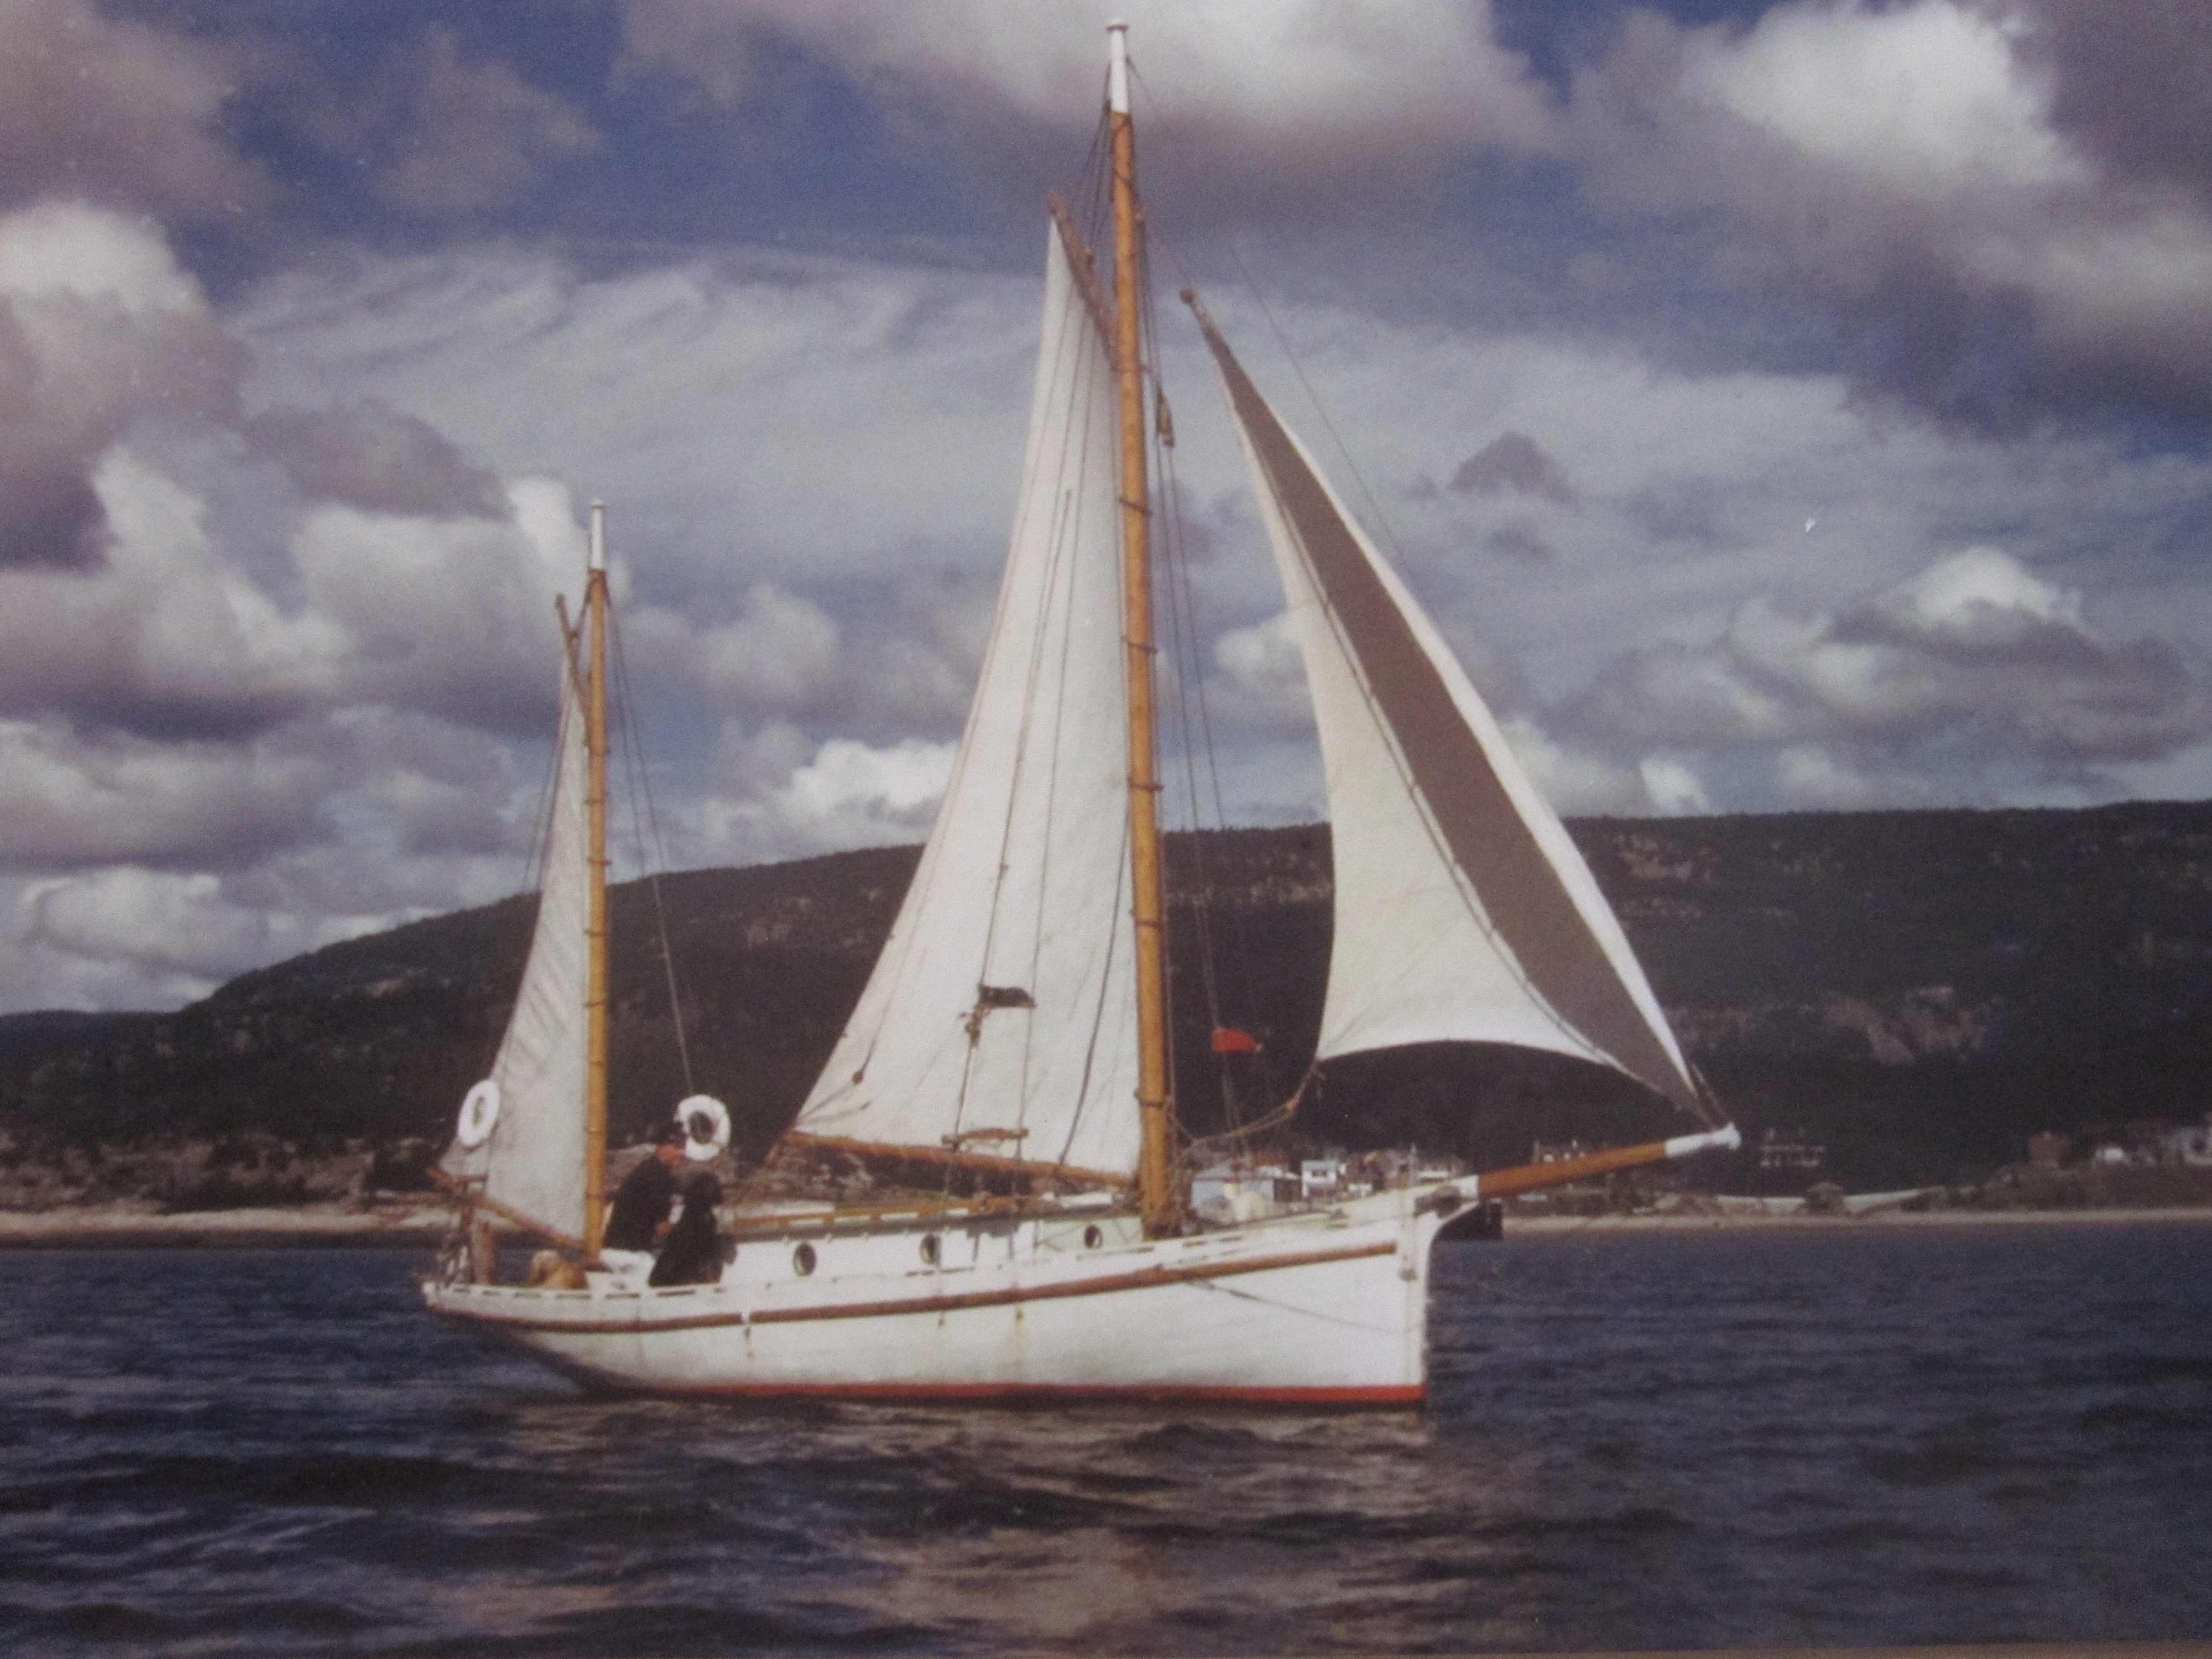 A photograph of a sailboat in a bay, with its captain and a dog.